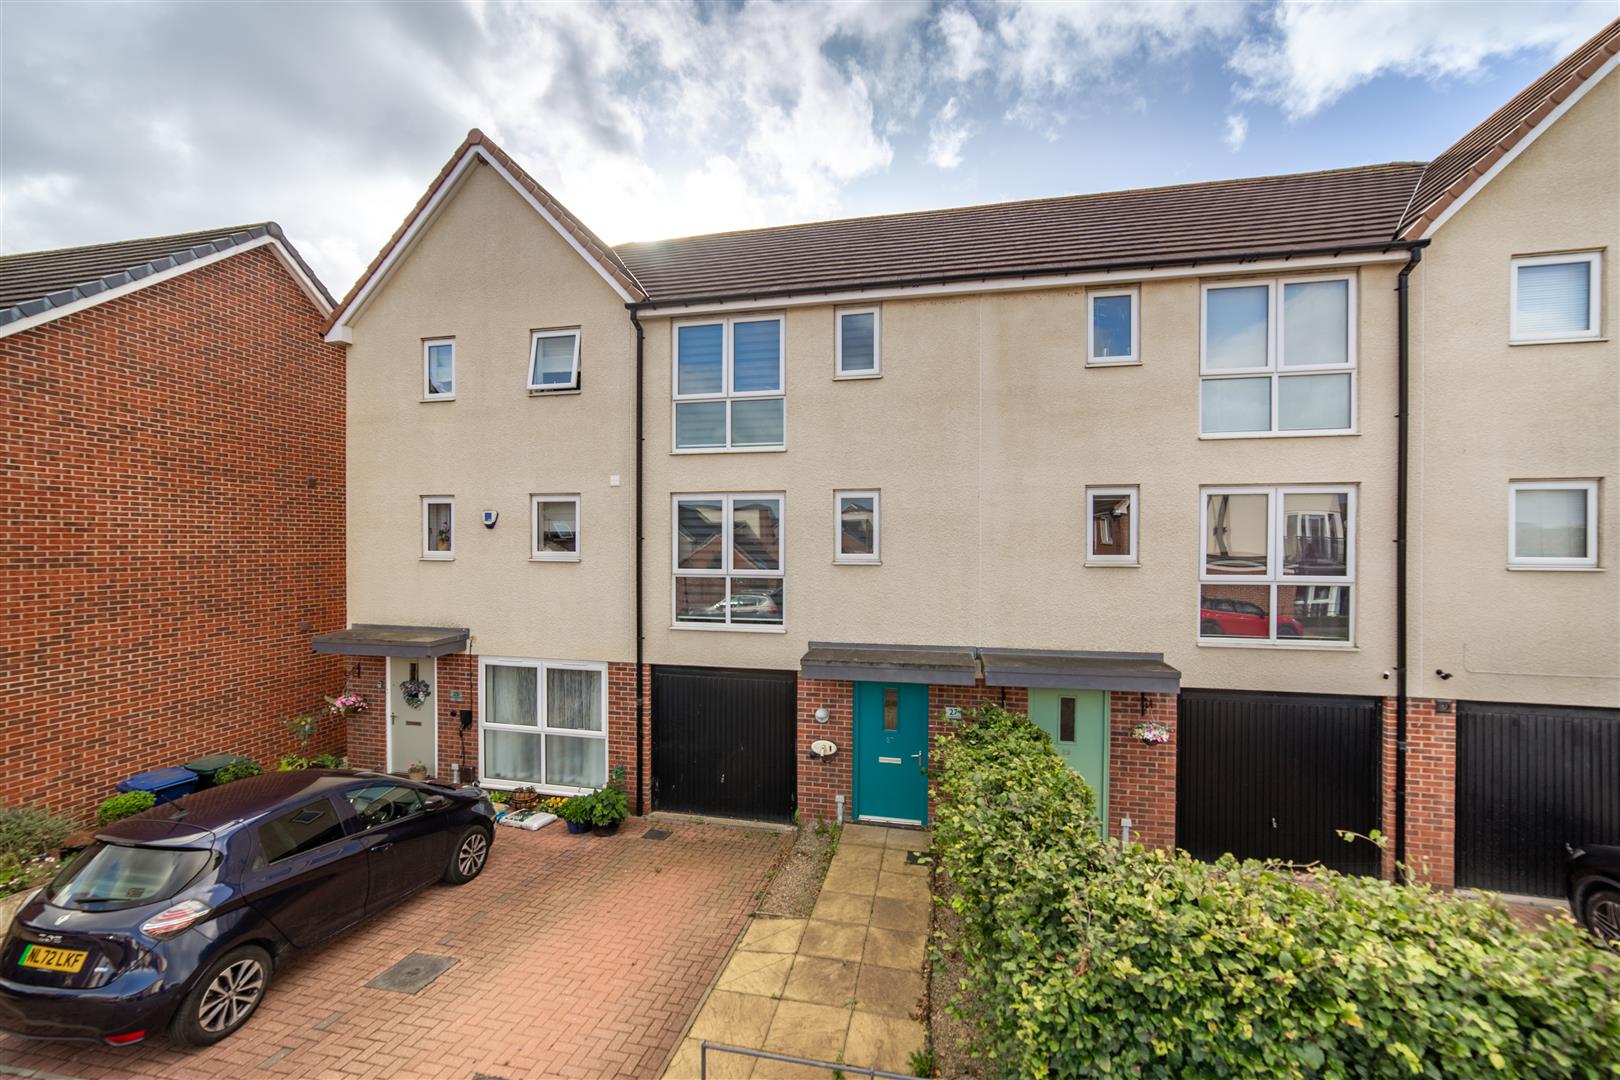 3 bed town house for sale in Leasingthorne Way, Newcastle Upon Tyne, NE13